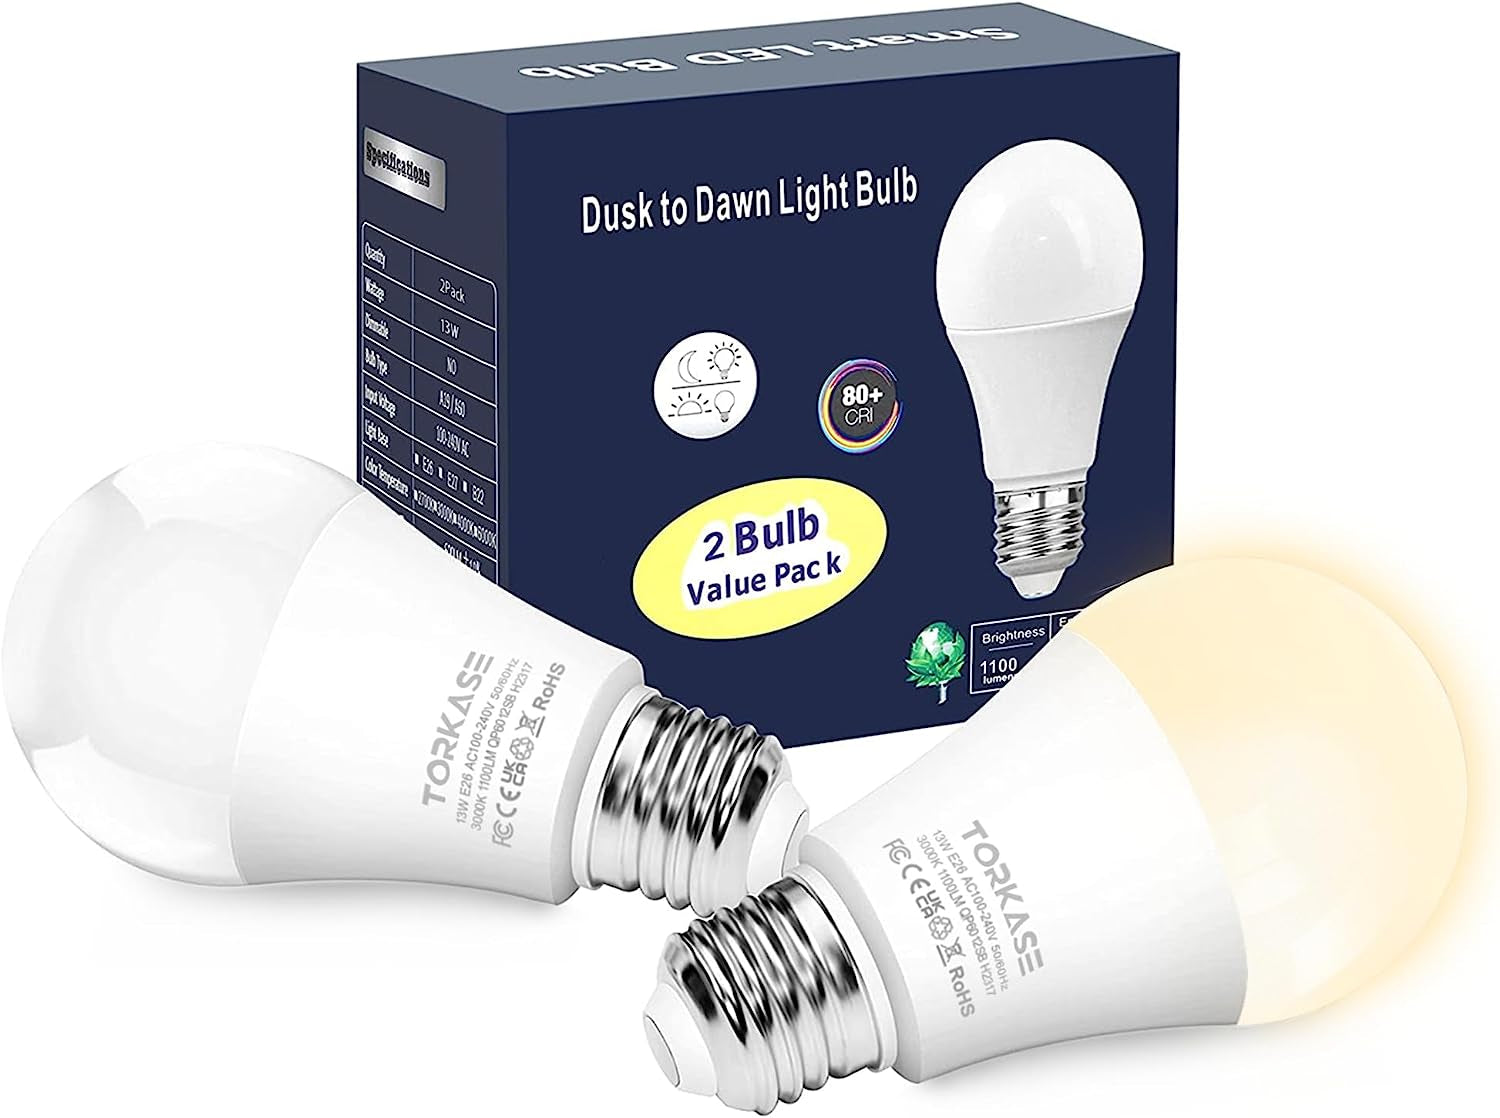 Outdoor Dusk to Dawn Light Bulbs, No Timer Required, 13W(100W Equivalent), 3000K Warm White, E26 A19 Automatic Sensor LED Bulb, Built-In Photocell Detector for Boundary Garage Patio, 2 Pack